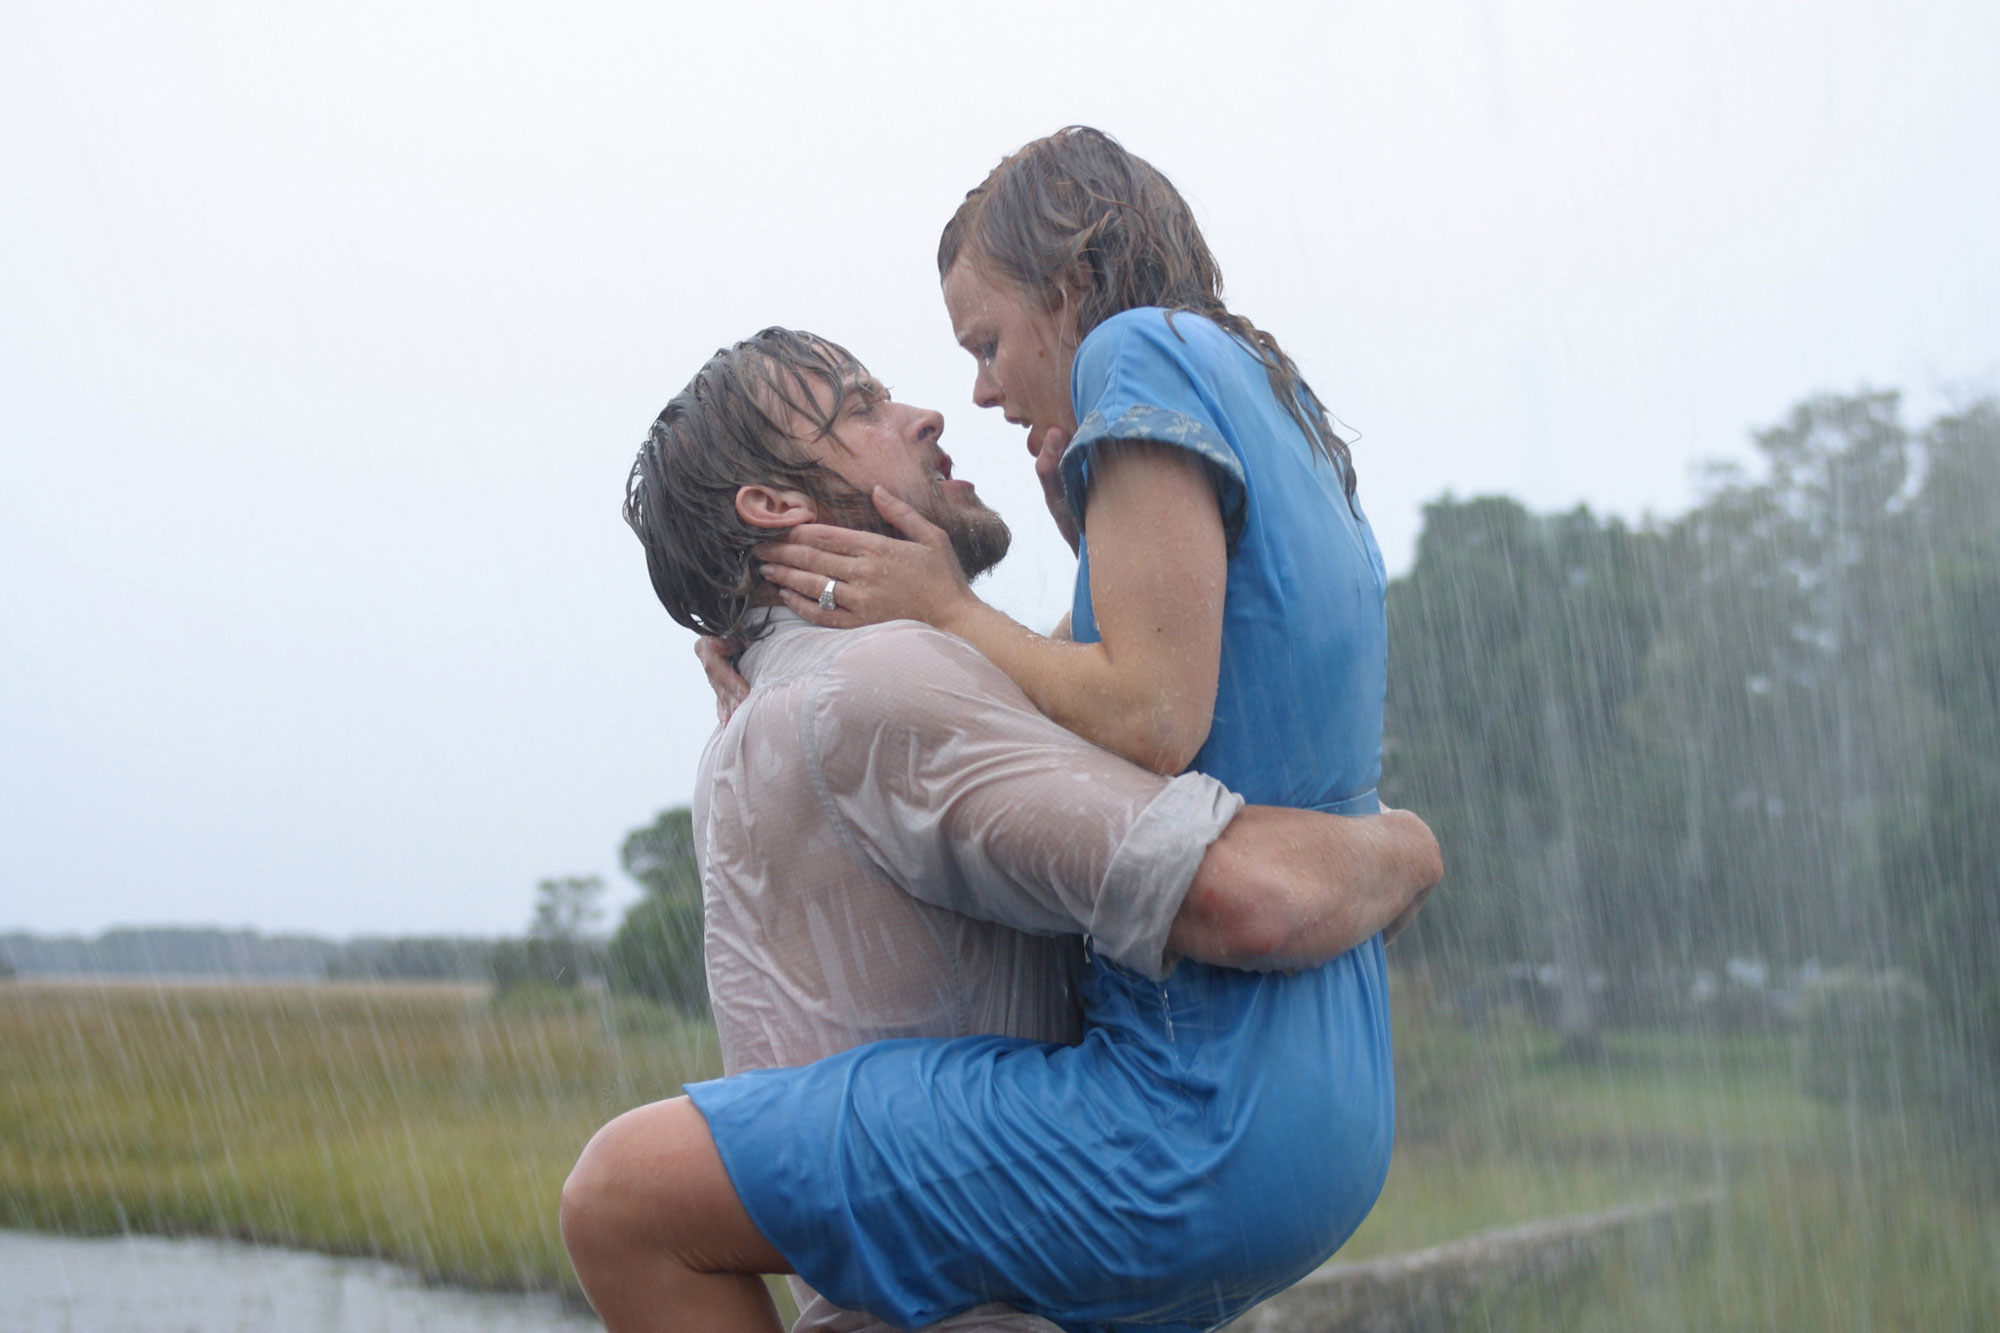 Still from the film The Notebook (2004)